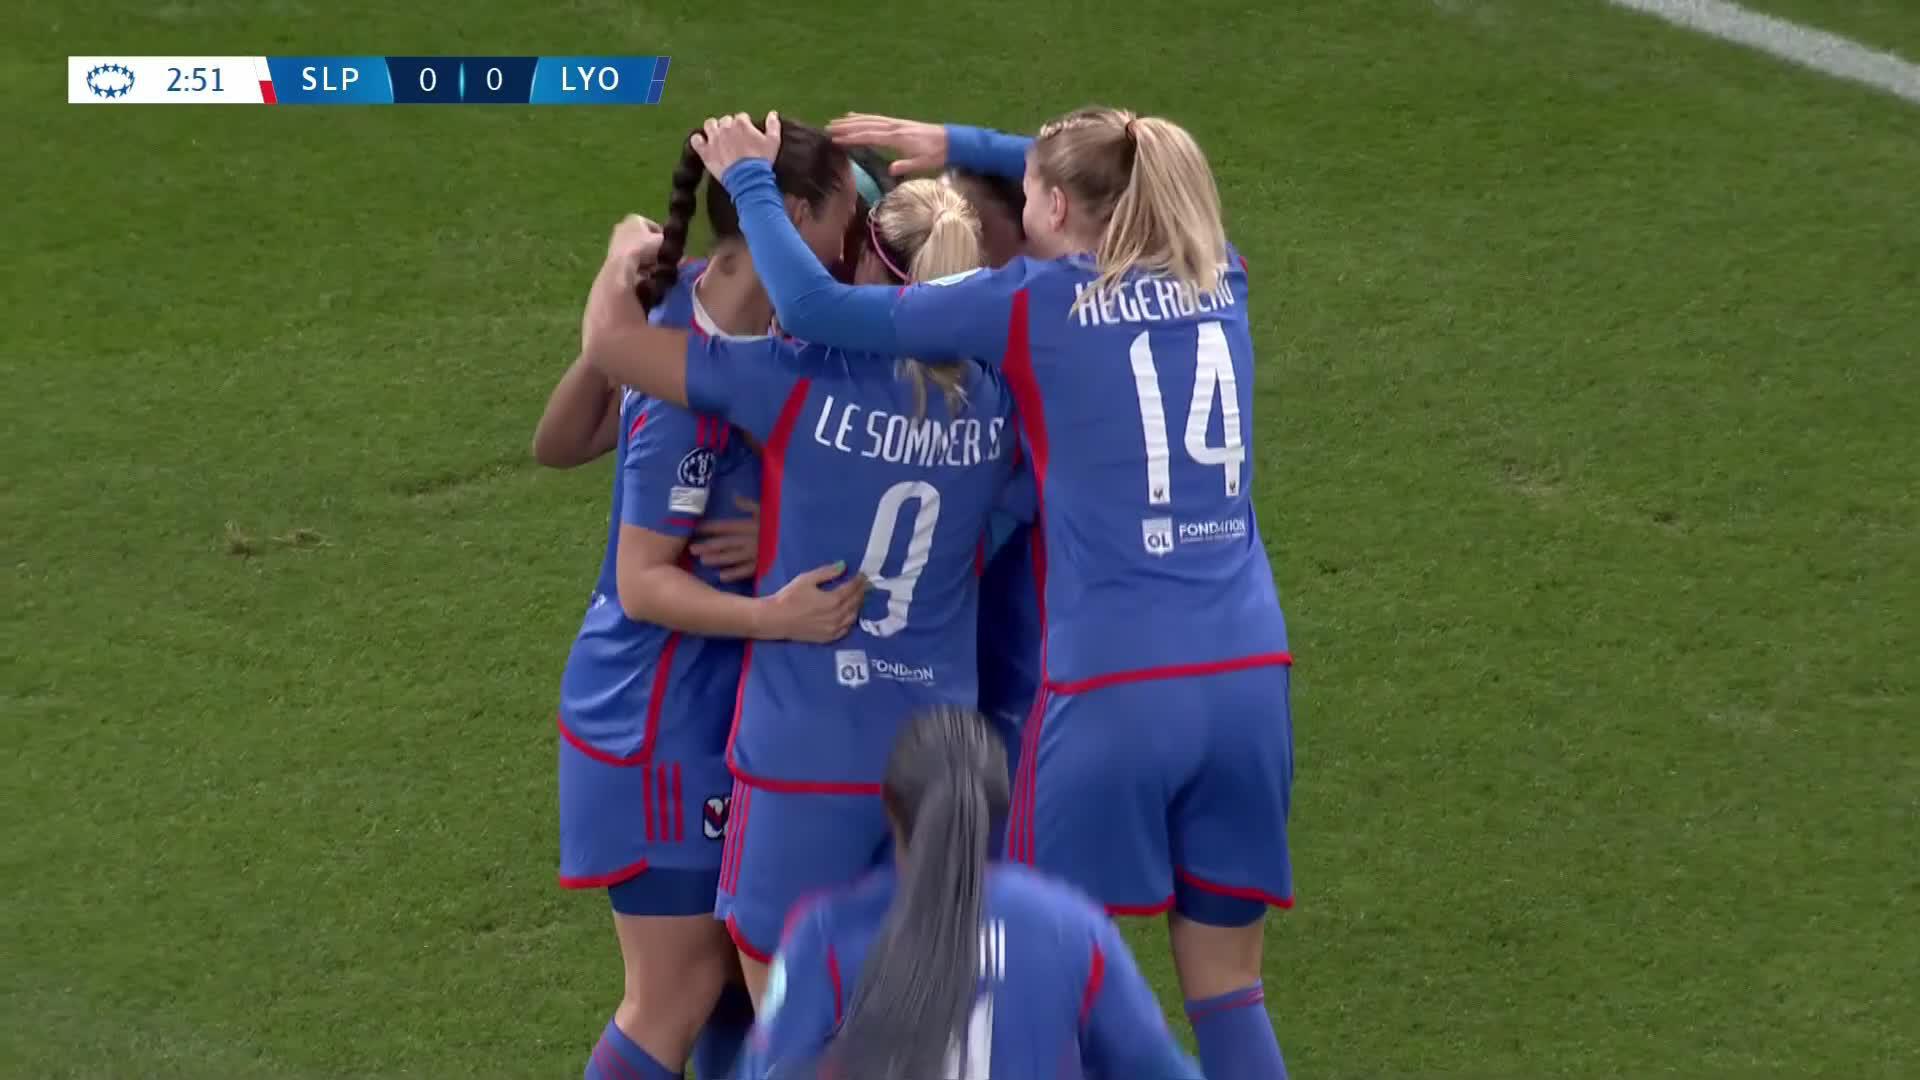 Lyon in the lead ⚡Sara Däbritz puts away the first shot of the game for the French side!🏴󠁧󠁢󠁥󠁮󠁧󠁿 🎙️ 👉  🎙️ 👉  🎙️ 👉